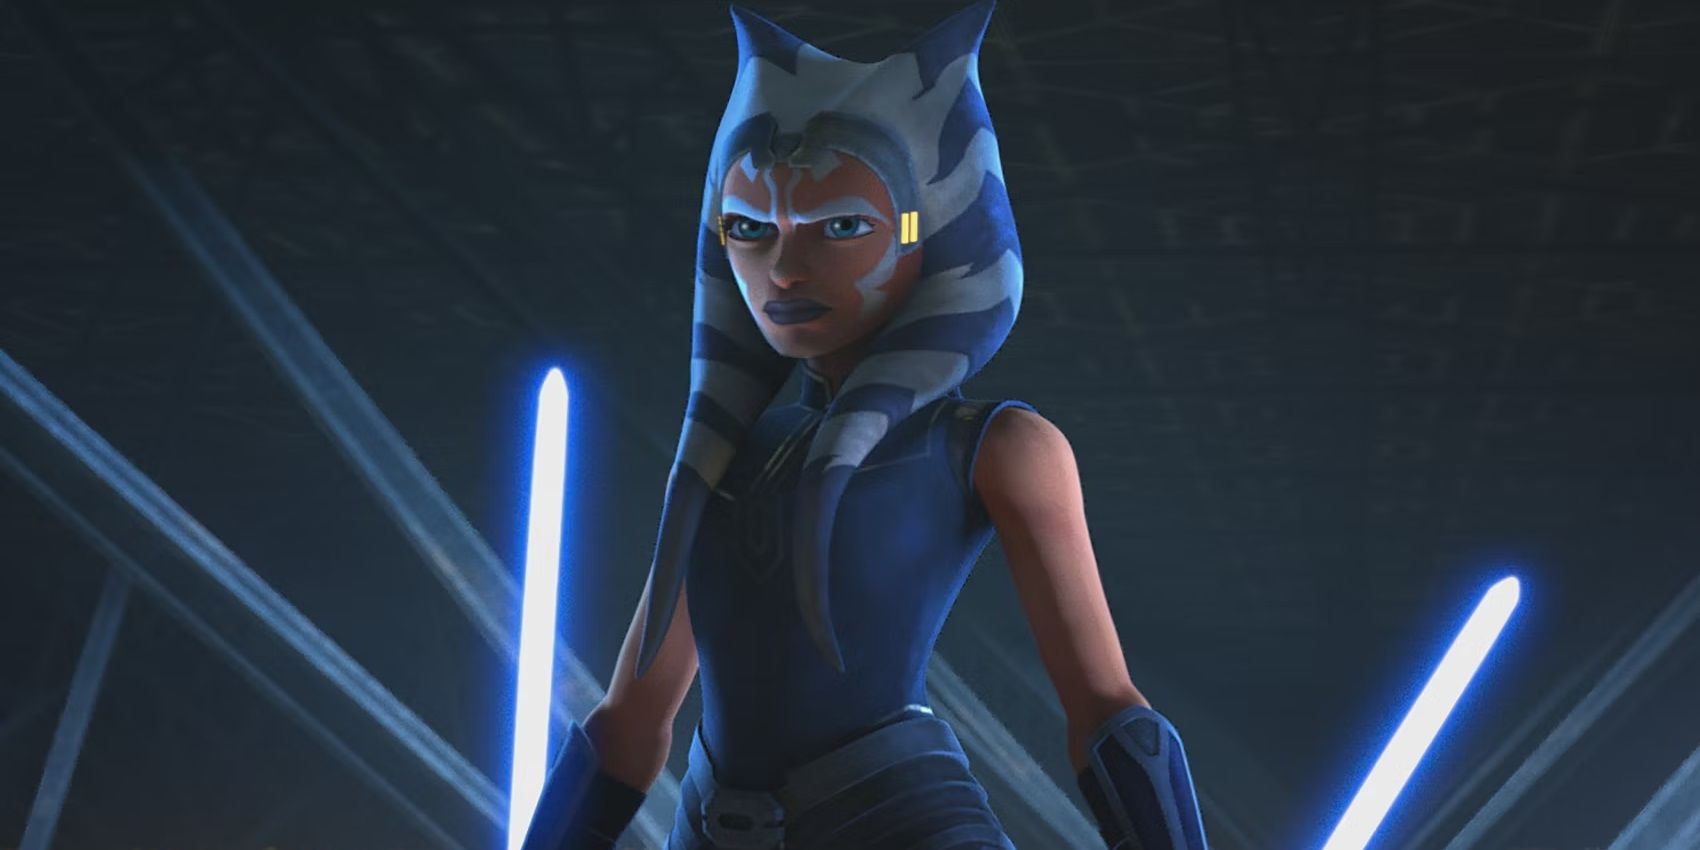 Ahsoka armed with her lightsabers in Star Wars Rebels